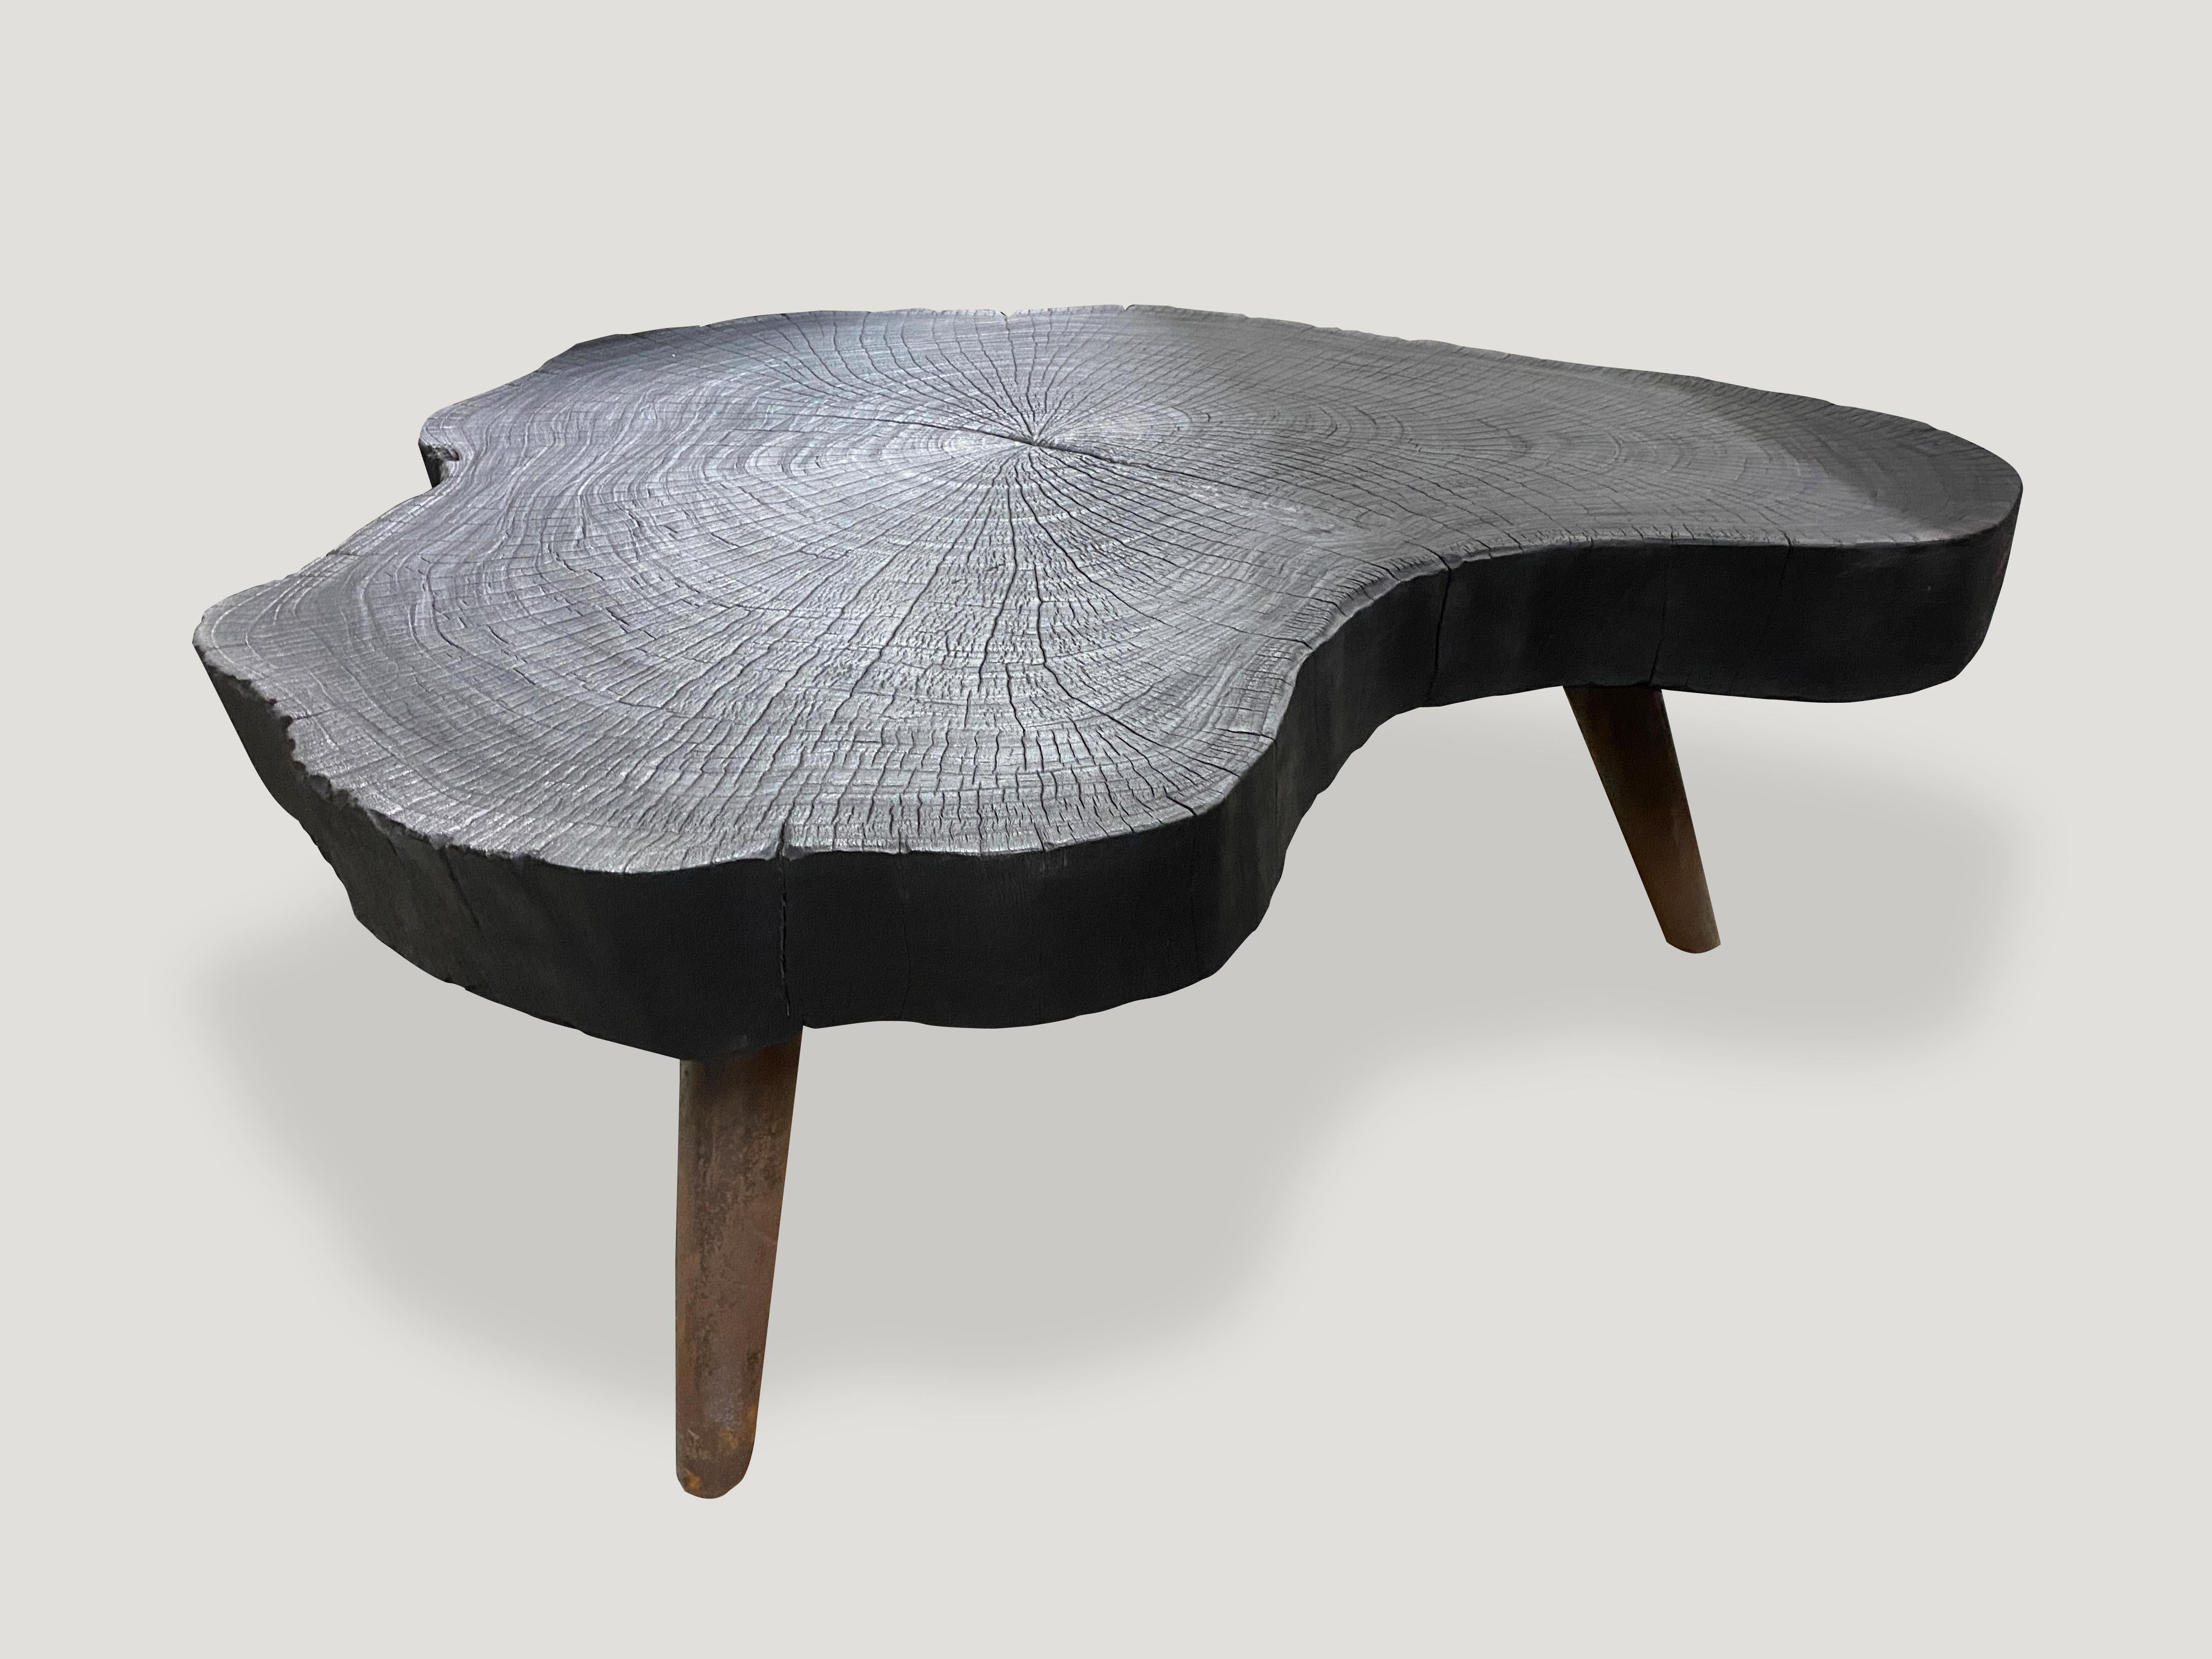 Single four inch slab coffee table charred and set on a mid century style burnt metal base, which we can also finish In pure black if preferred. Burnt sanded and sealed exposing the beautiful grain of the wood.

The Triple Burnt Collection